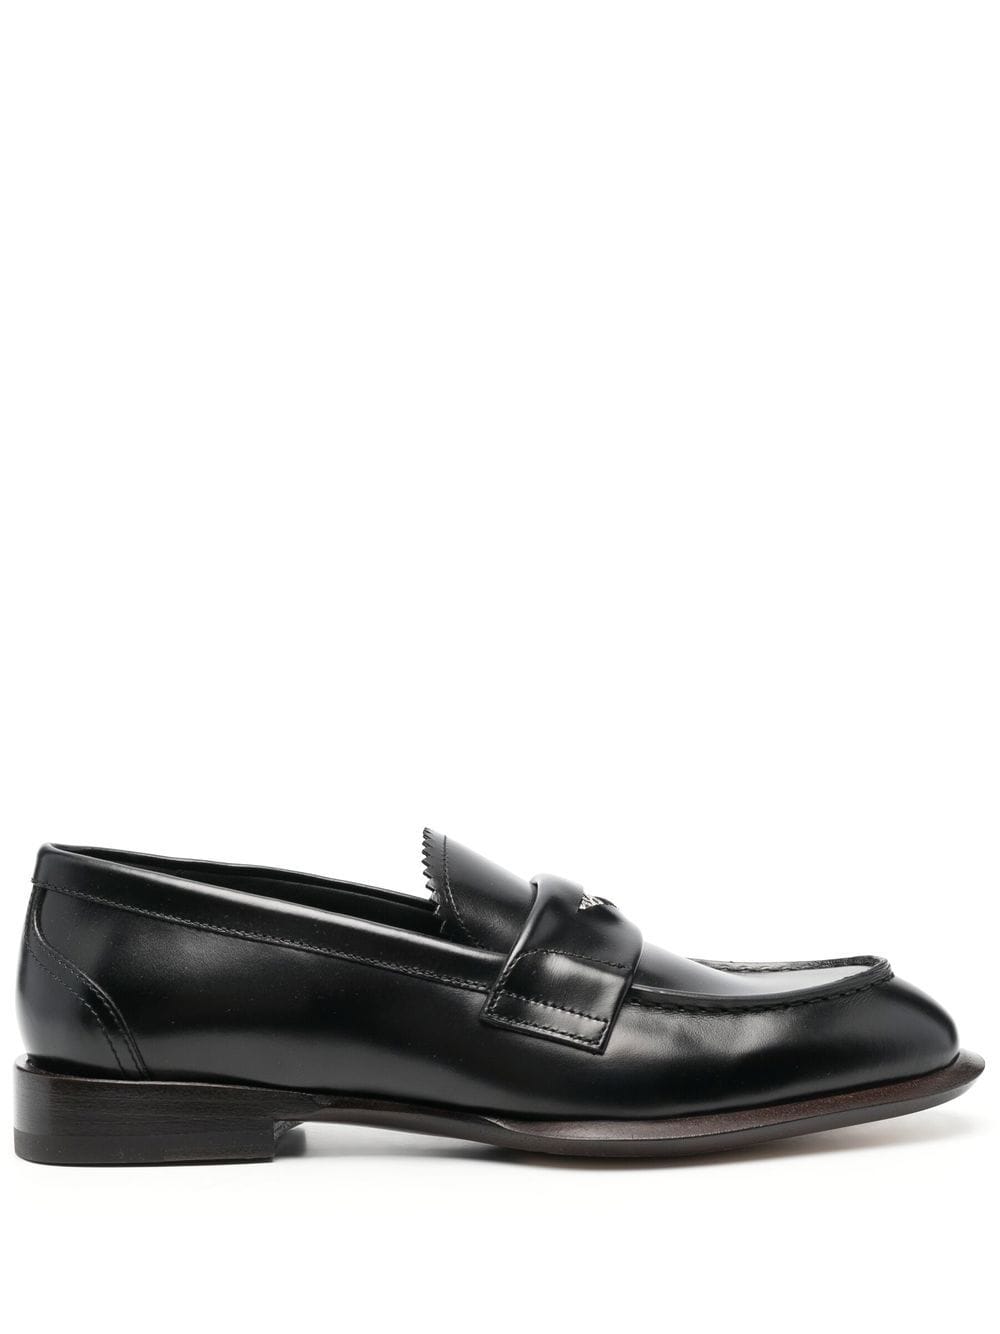 Image 1 of Alexander McQueen coin-embellished penny loafers